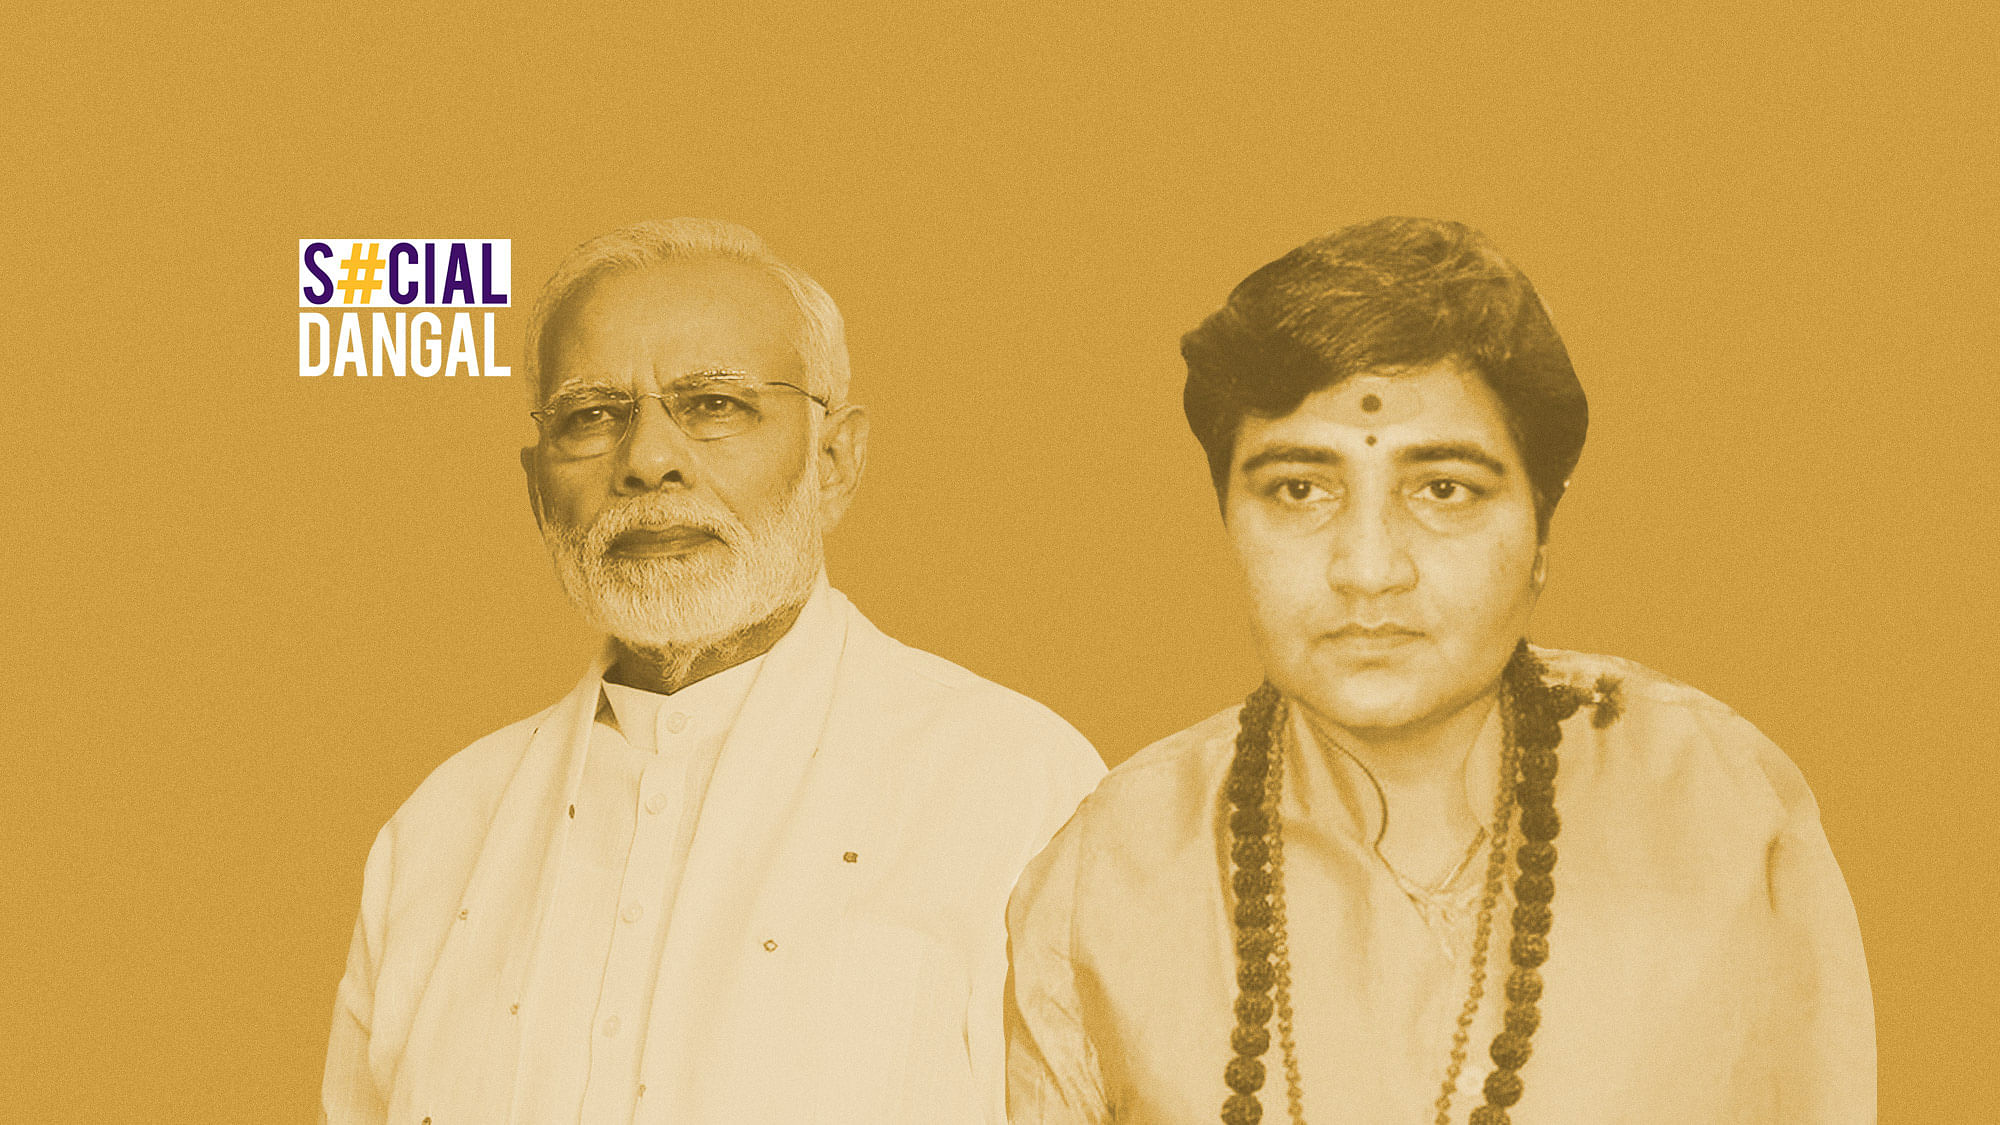 Narendra Modi said Pragya’s ticket is a symbol to all those who accused Hindus of being terrorists.